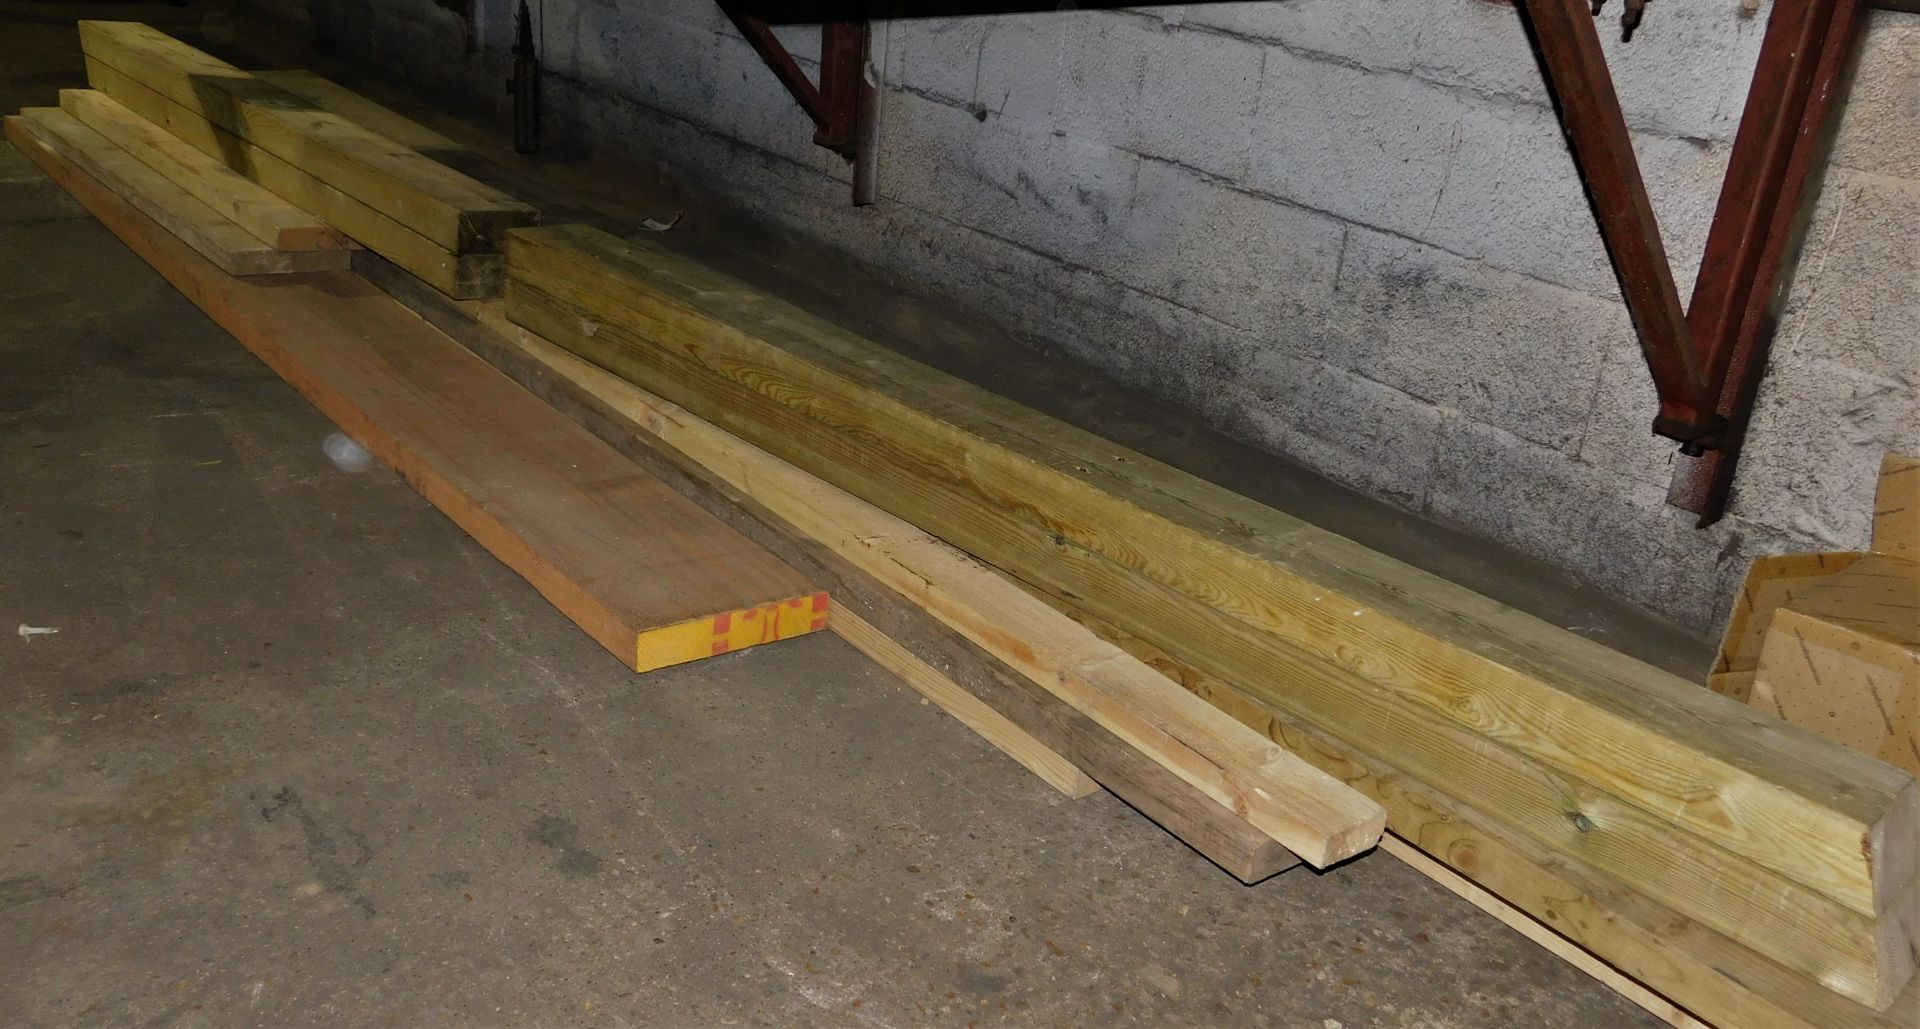 Mahogany Plank Together with a Quantity of Softwoods (Location: Finedon - Please Refer to General